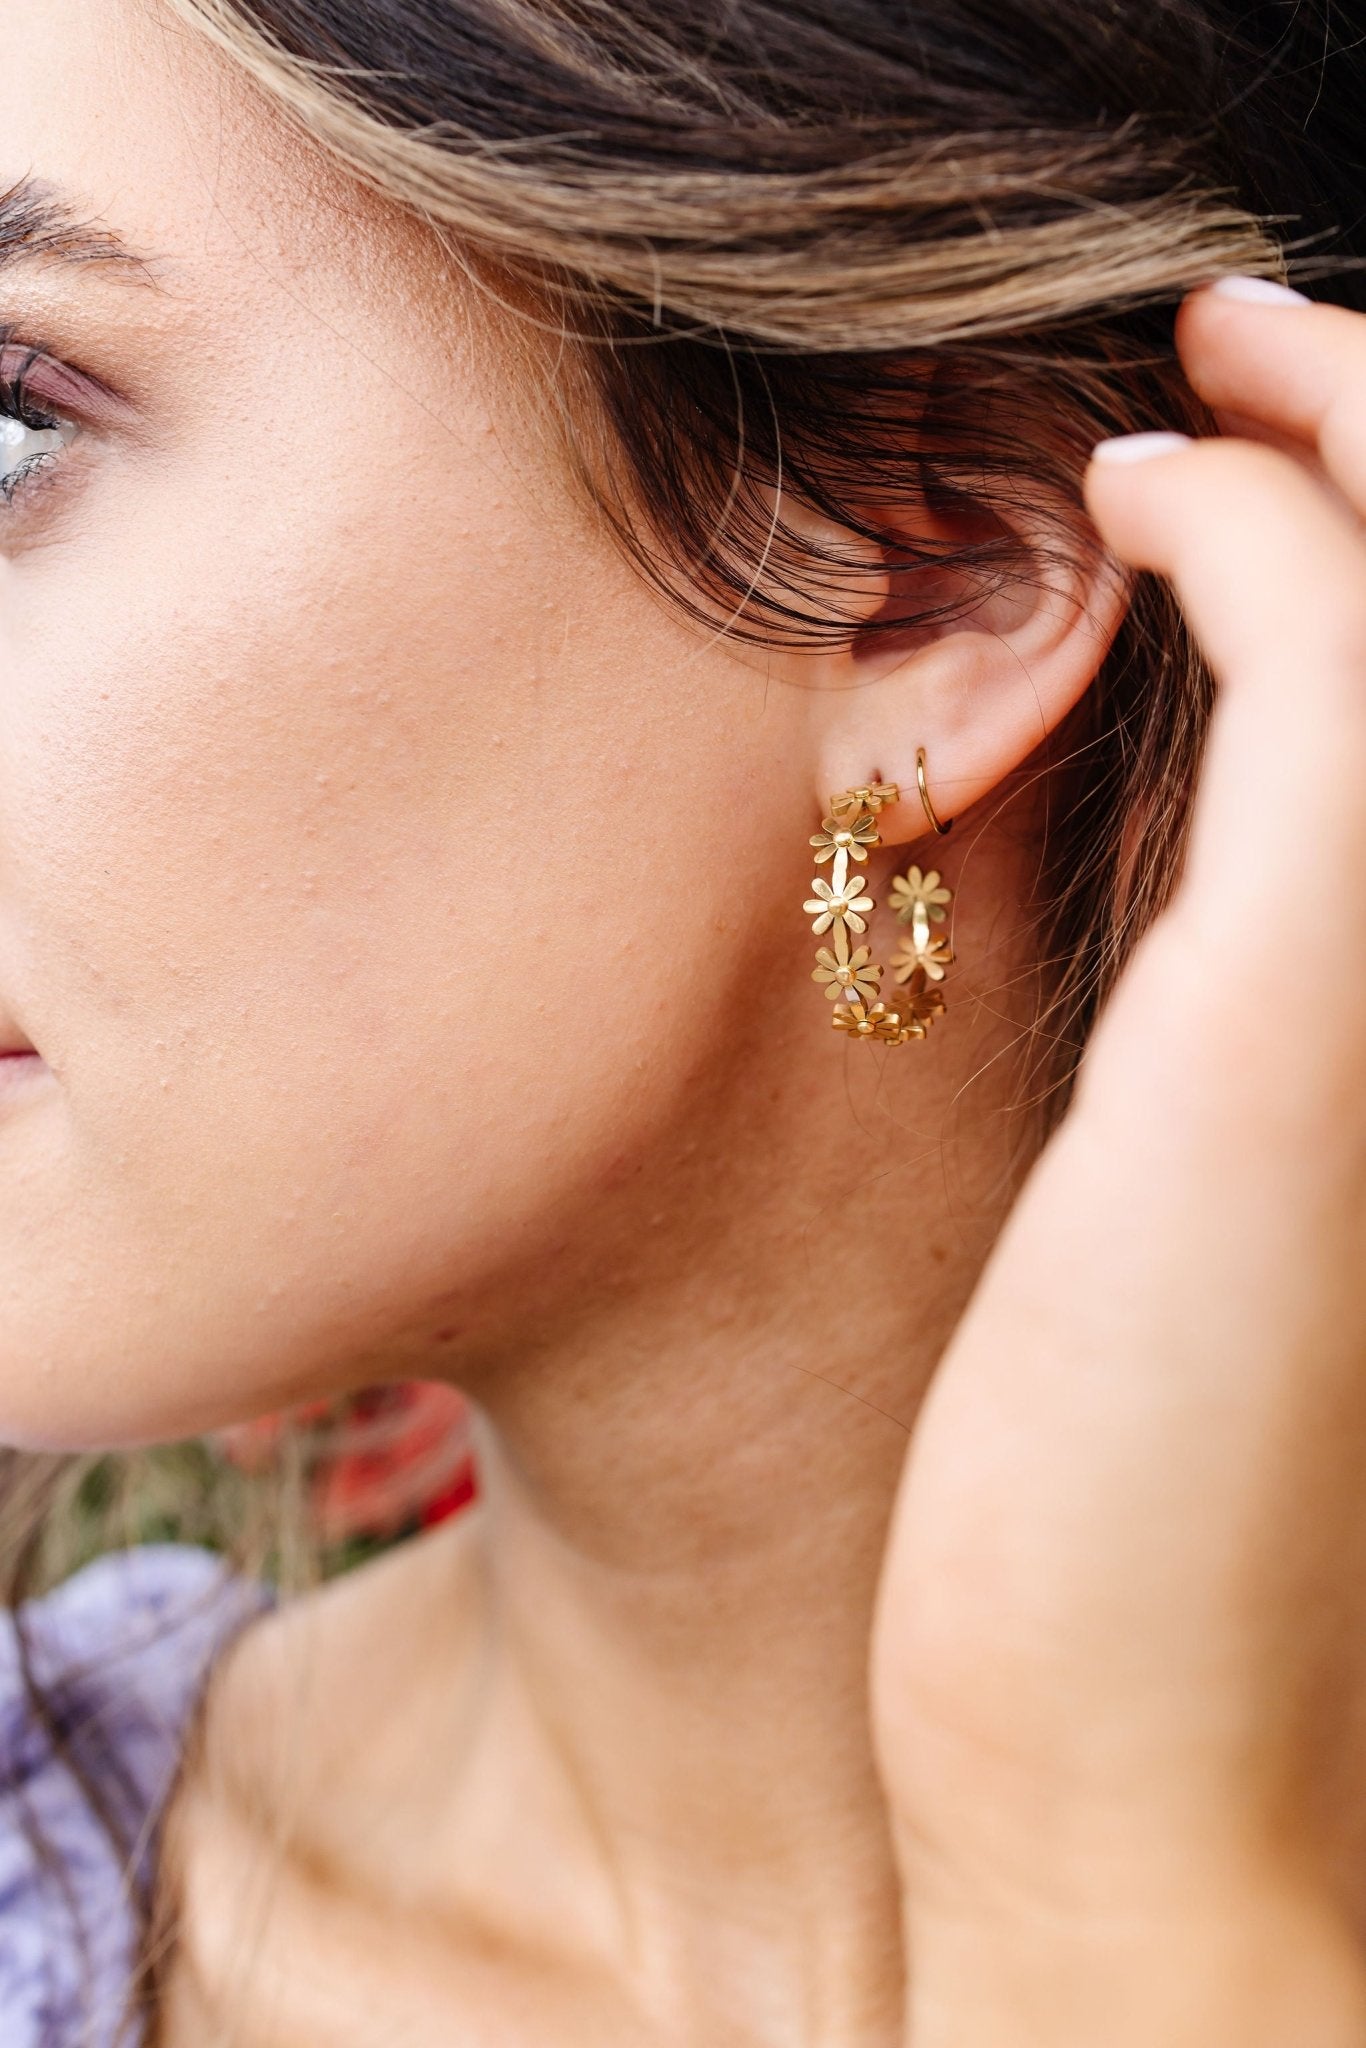 What Earrings Are Hypoallergenic? – Alexis Jae Jewelry